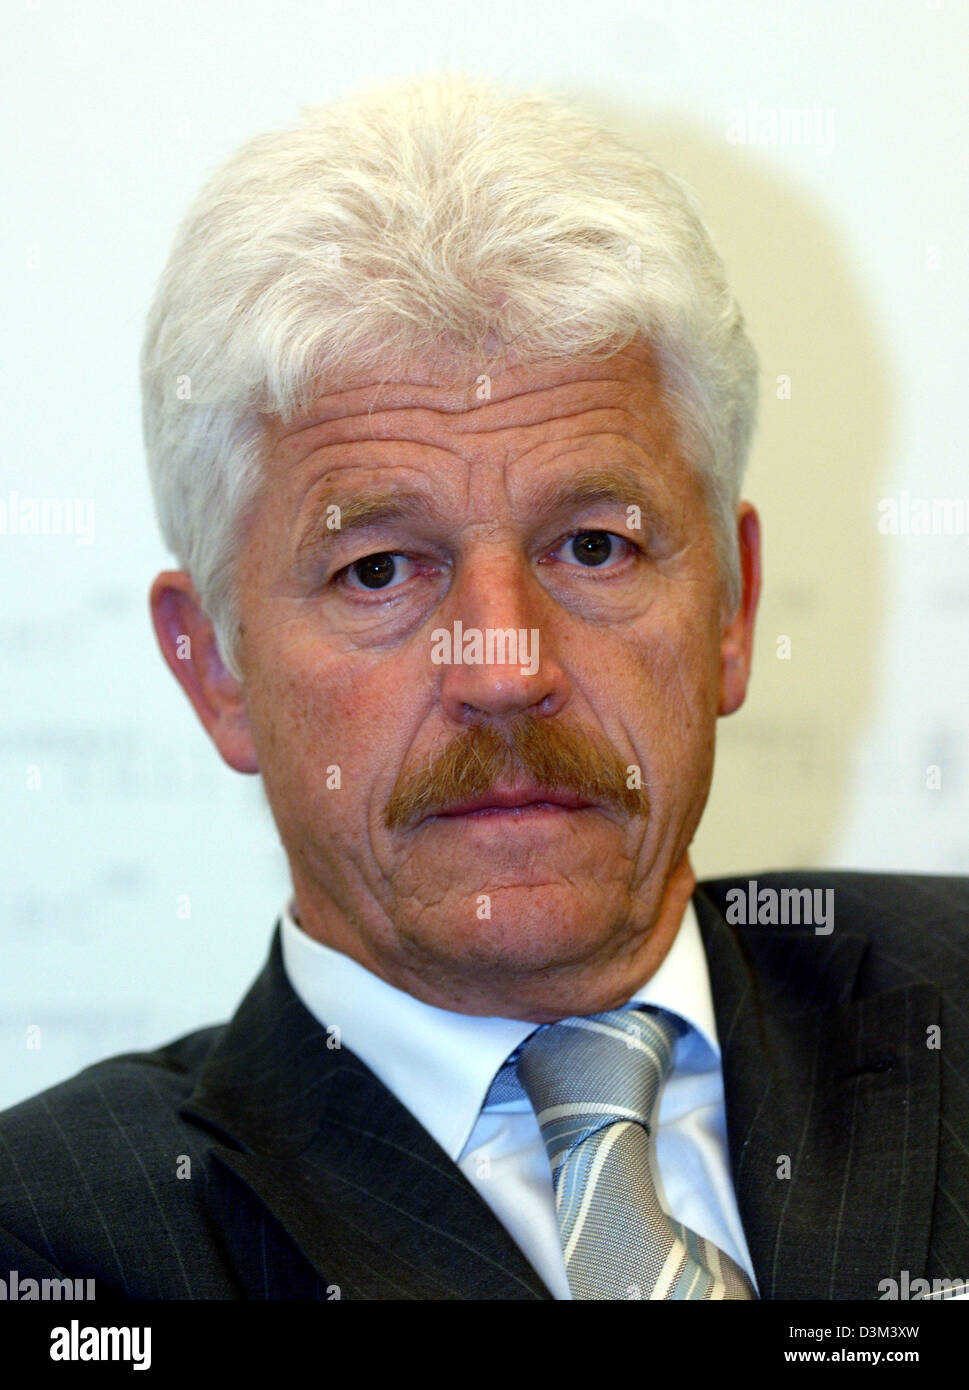 (dpa) - Benedikt Weibel, Chairman of the executive board of Swiss railway company SBB AG, pictured during a press conference in line with the railway fair 'railtec' in Dortmund, Germany, Monday, 07 November 2005. Photo: Franz-Peter Tschauner Stock Photo